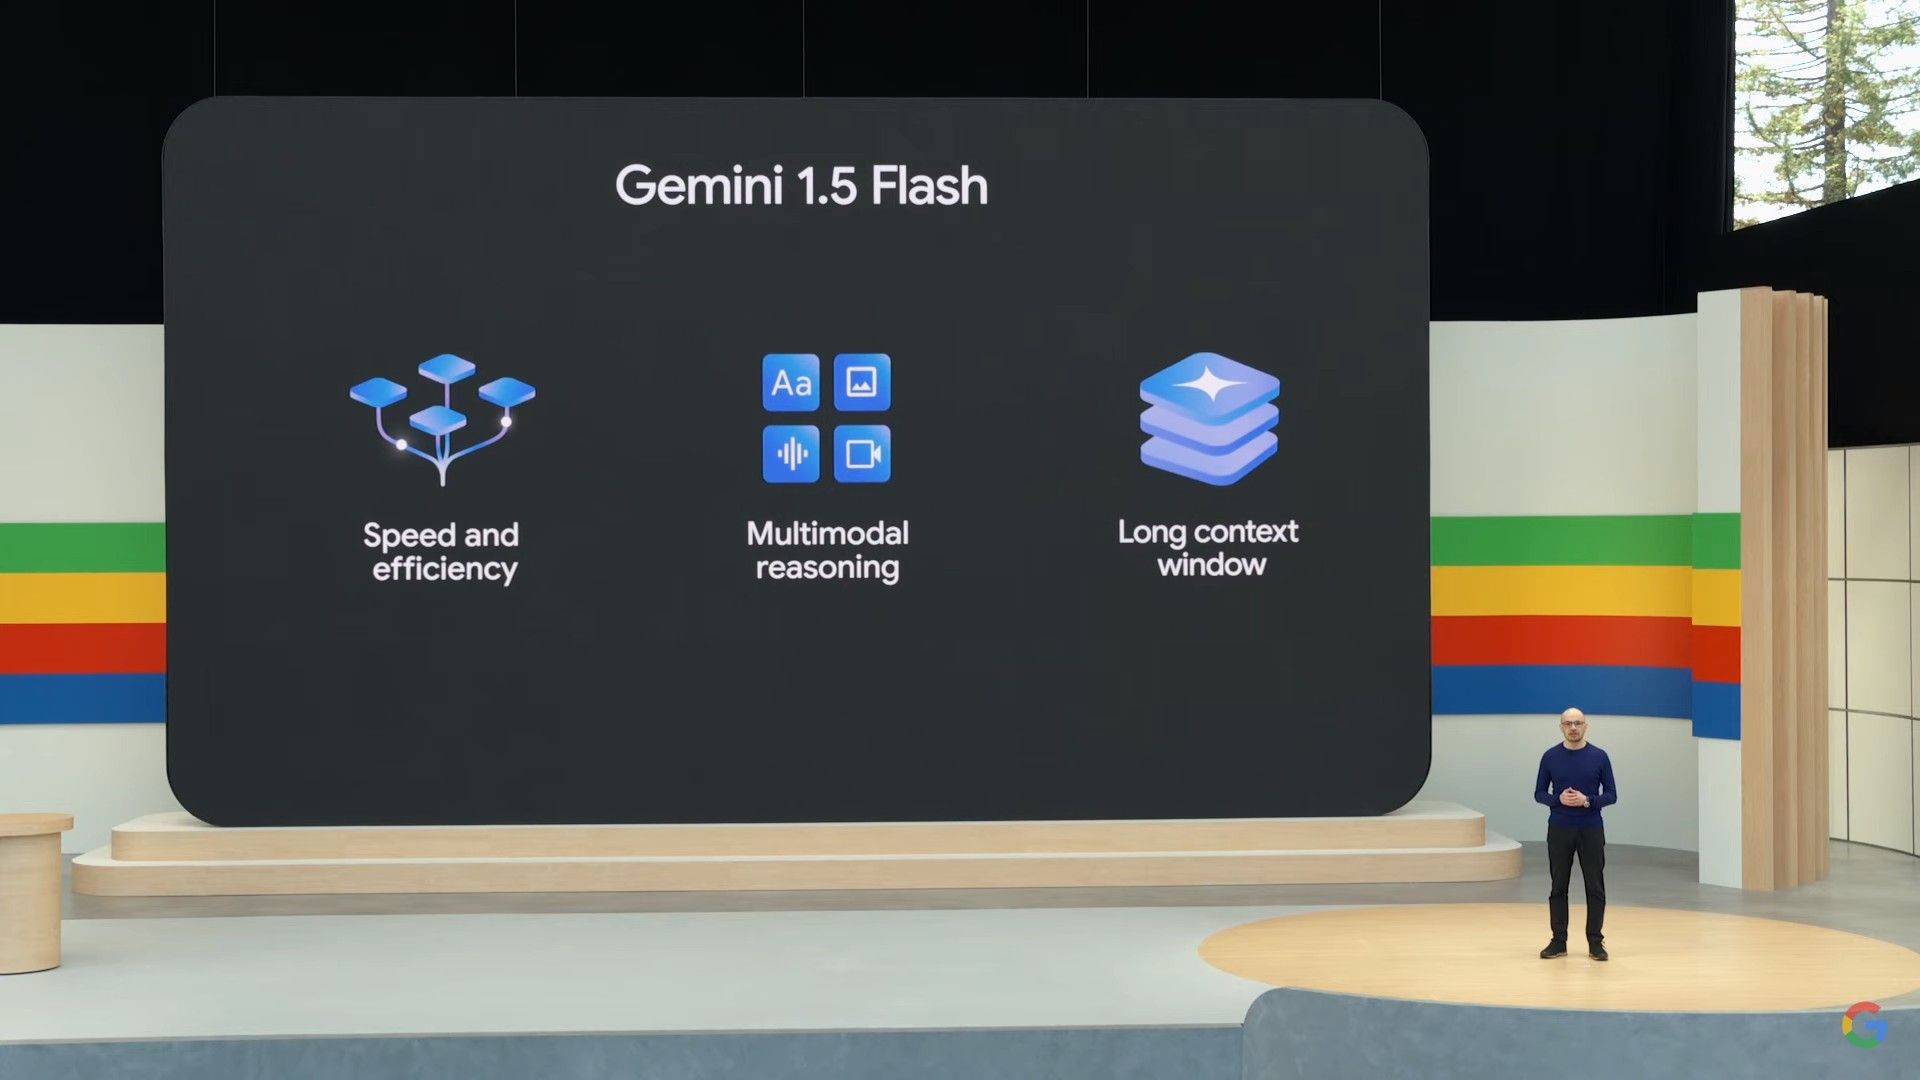 Gemini 1.5 Flash is a new model from Google aimed at giving you super fast responses